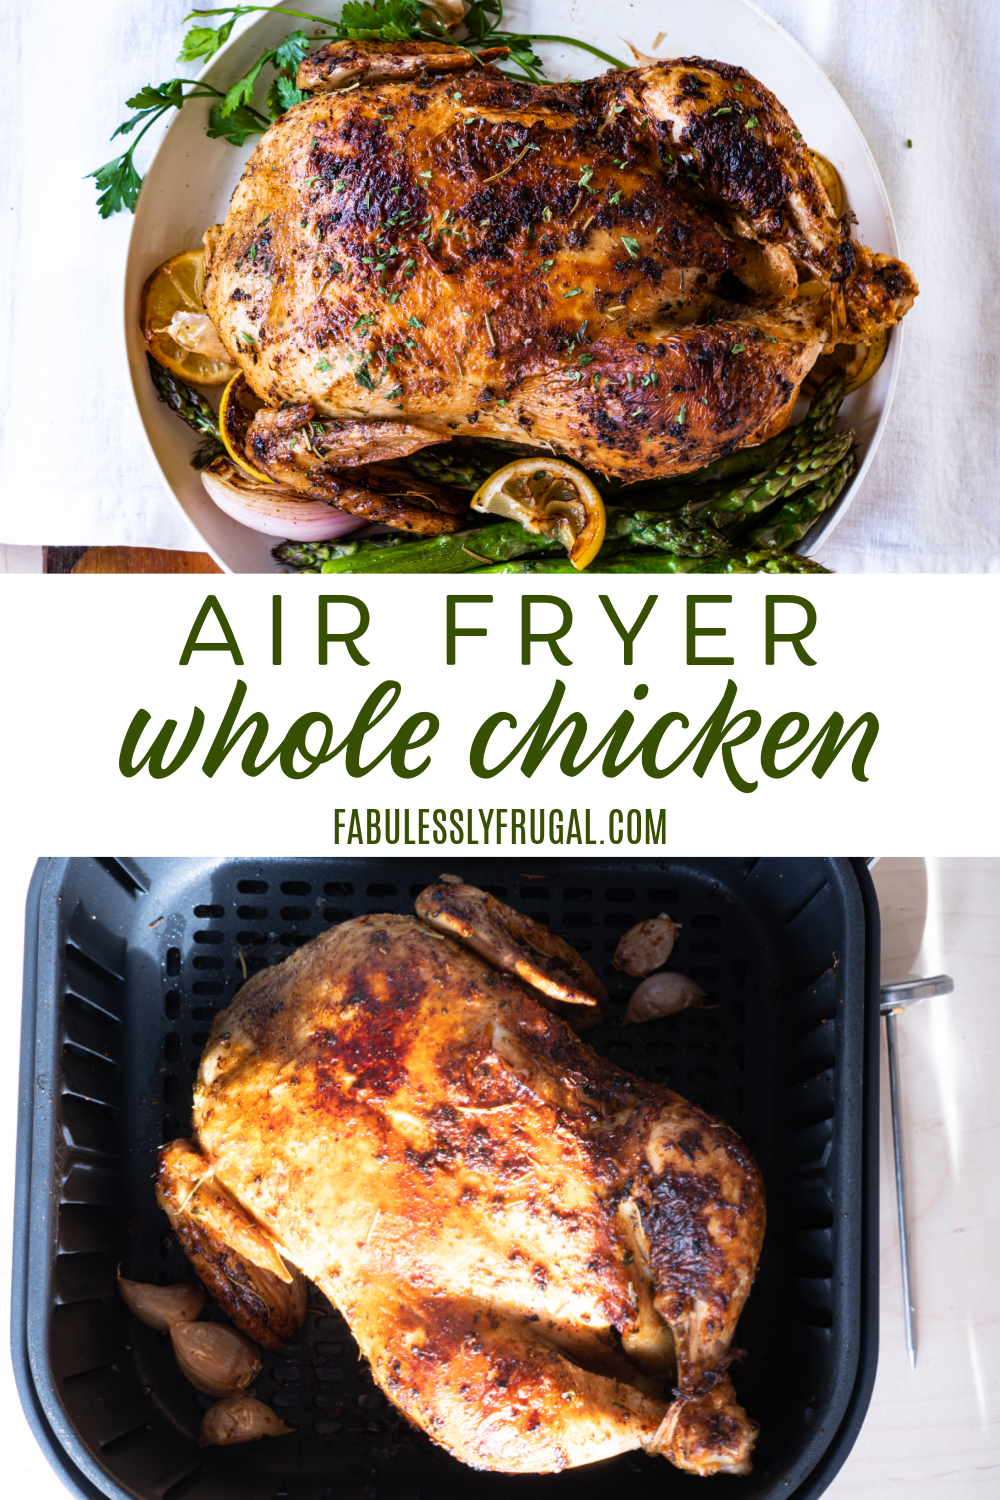 Air Fryer Whole Chicken is one of the easiest air fryer recipes. All you need is an hour to make this amazing chicken in the air fryer